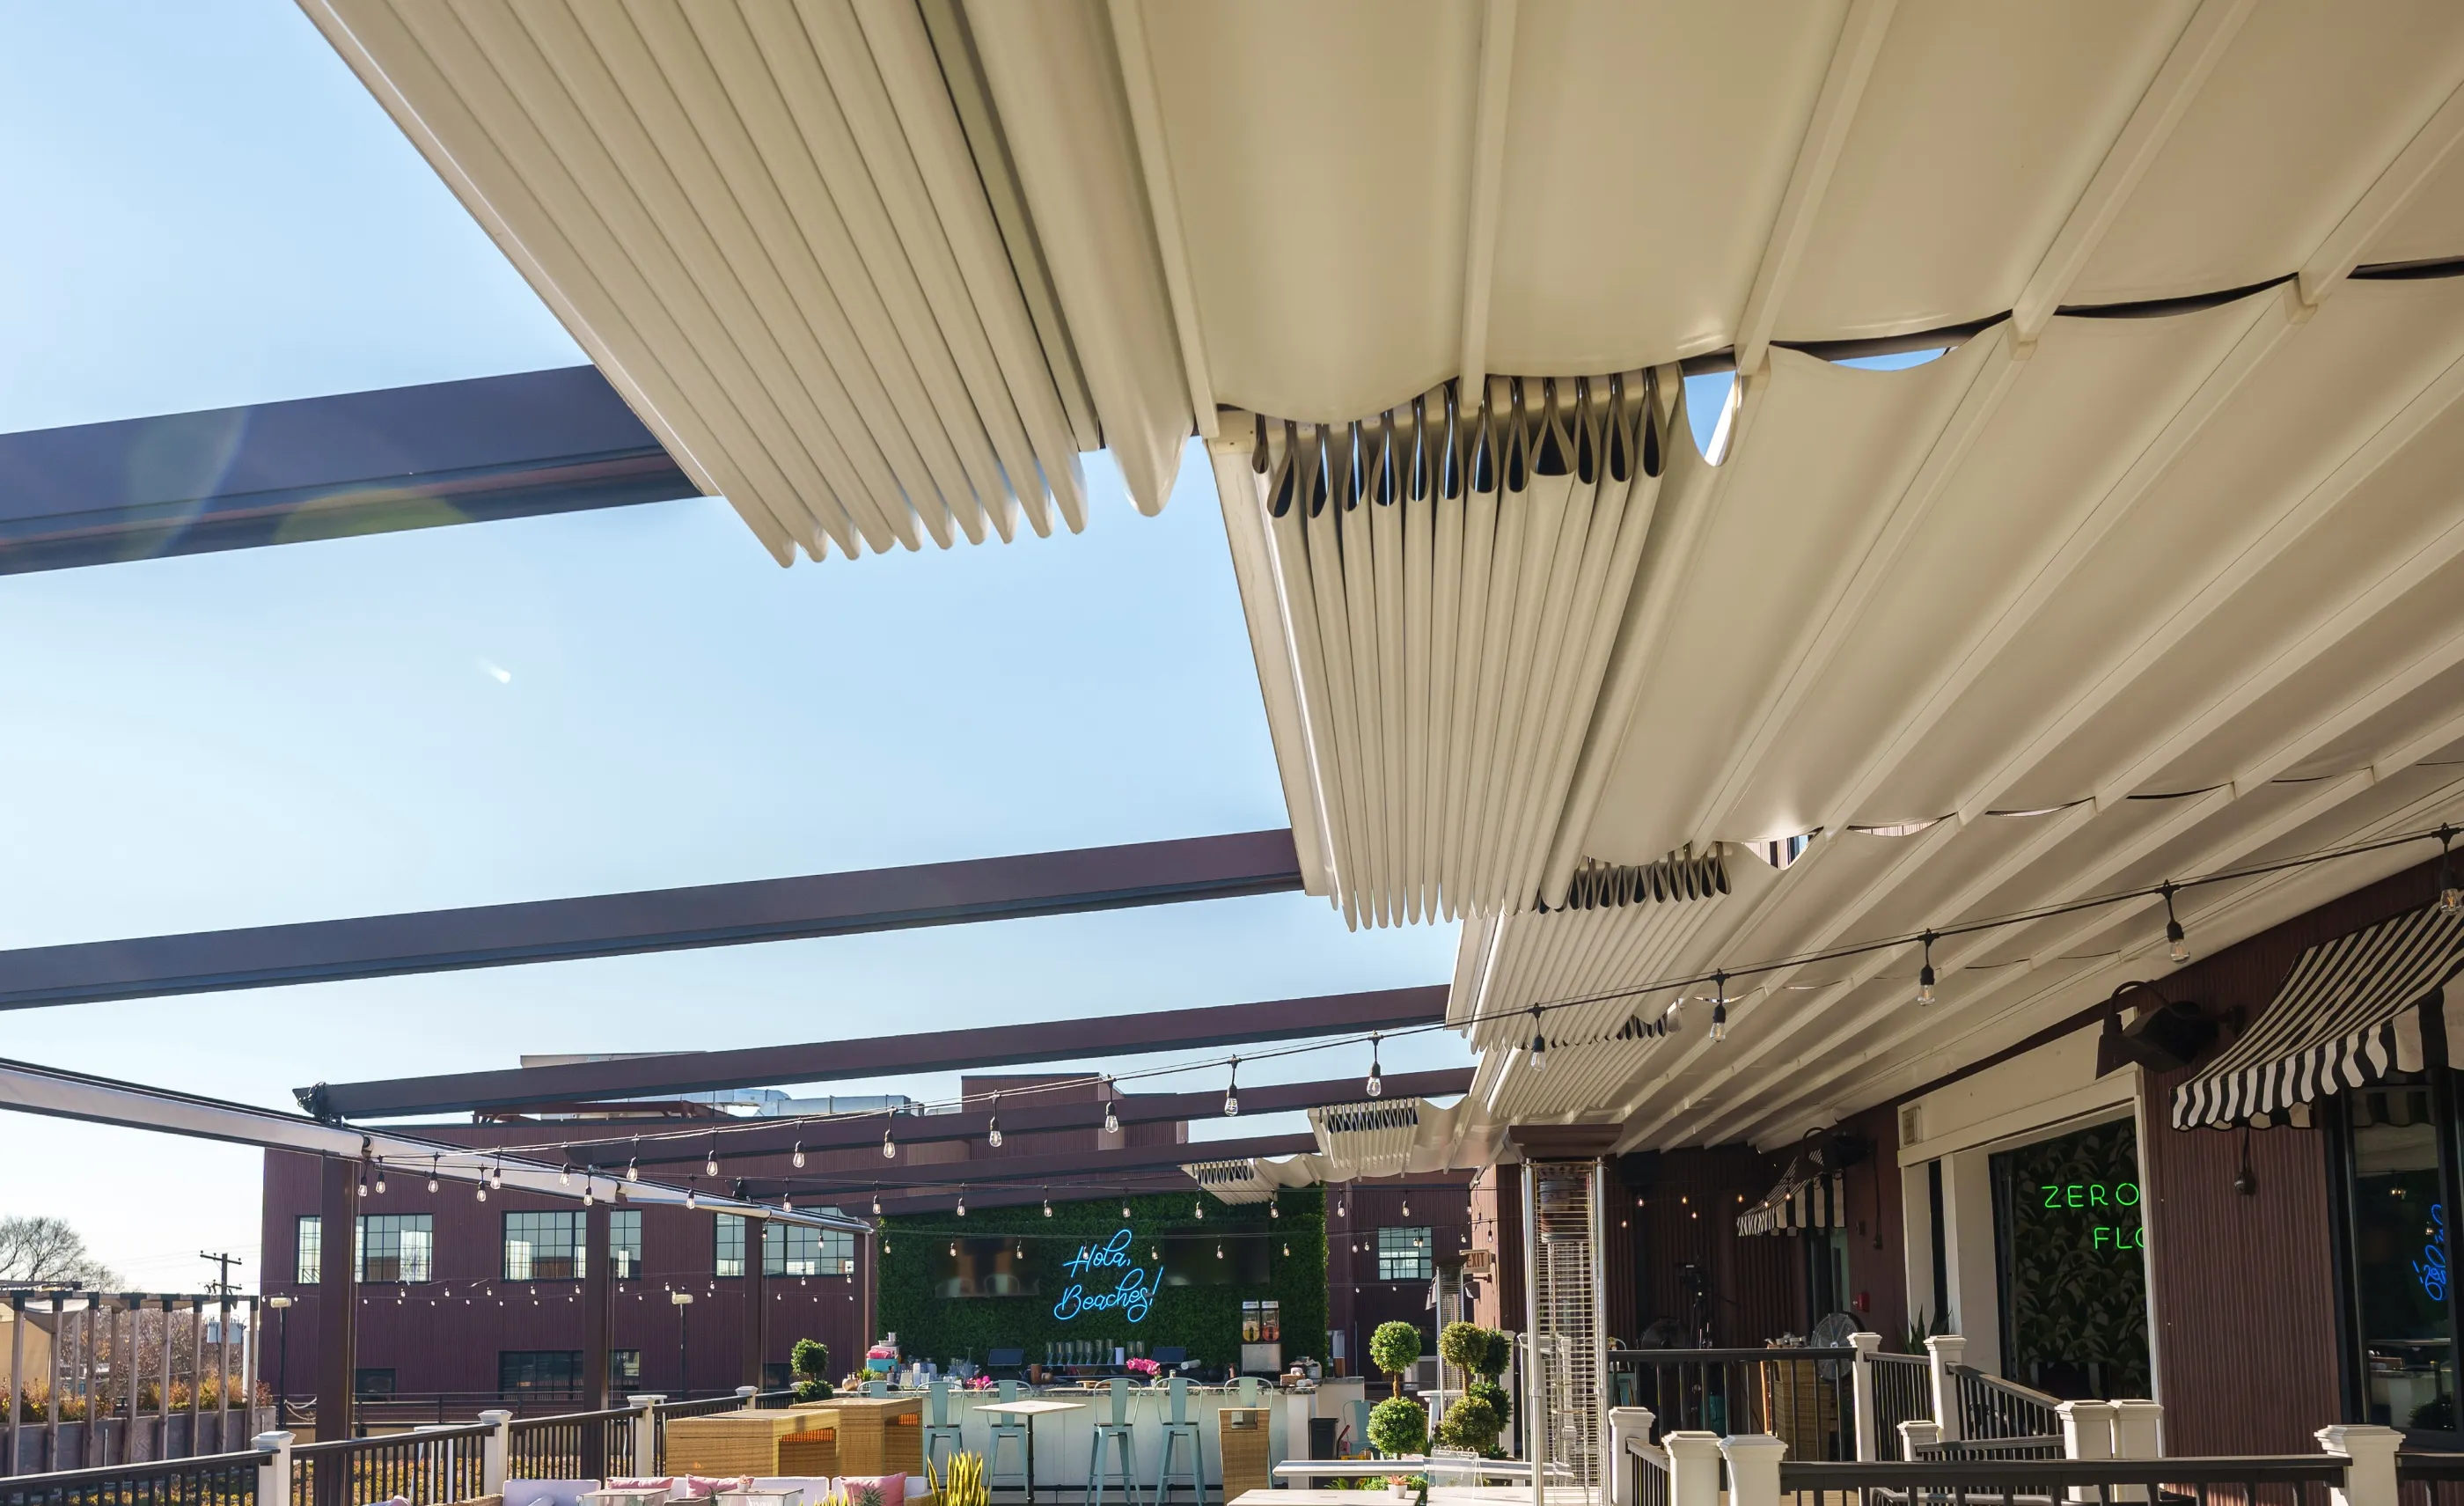 Featured image: Retractable pergola under clear skies with tables and chairs - Read full post: Retractable Pergolas for All Seasons: How to Use Them Year-Round